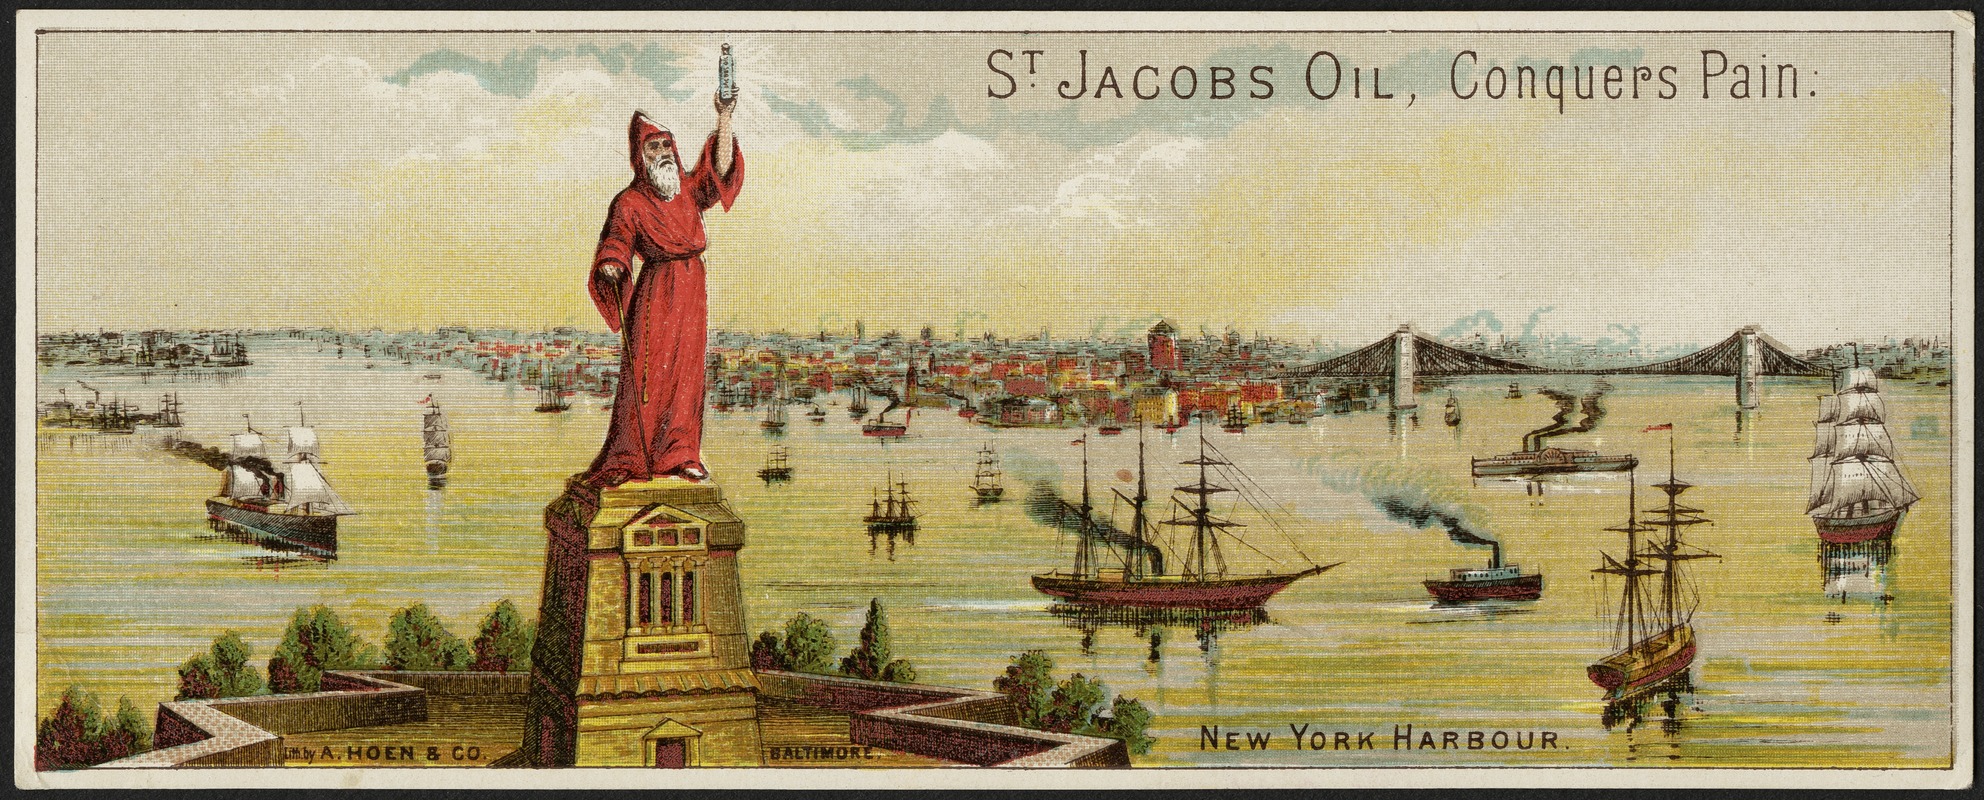 St. Jacobs Oil, conquers pain - New York Harbour